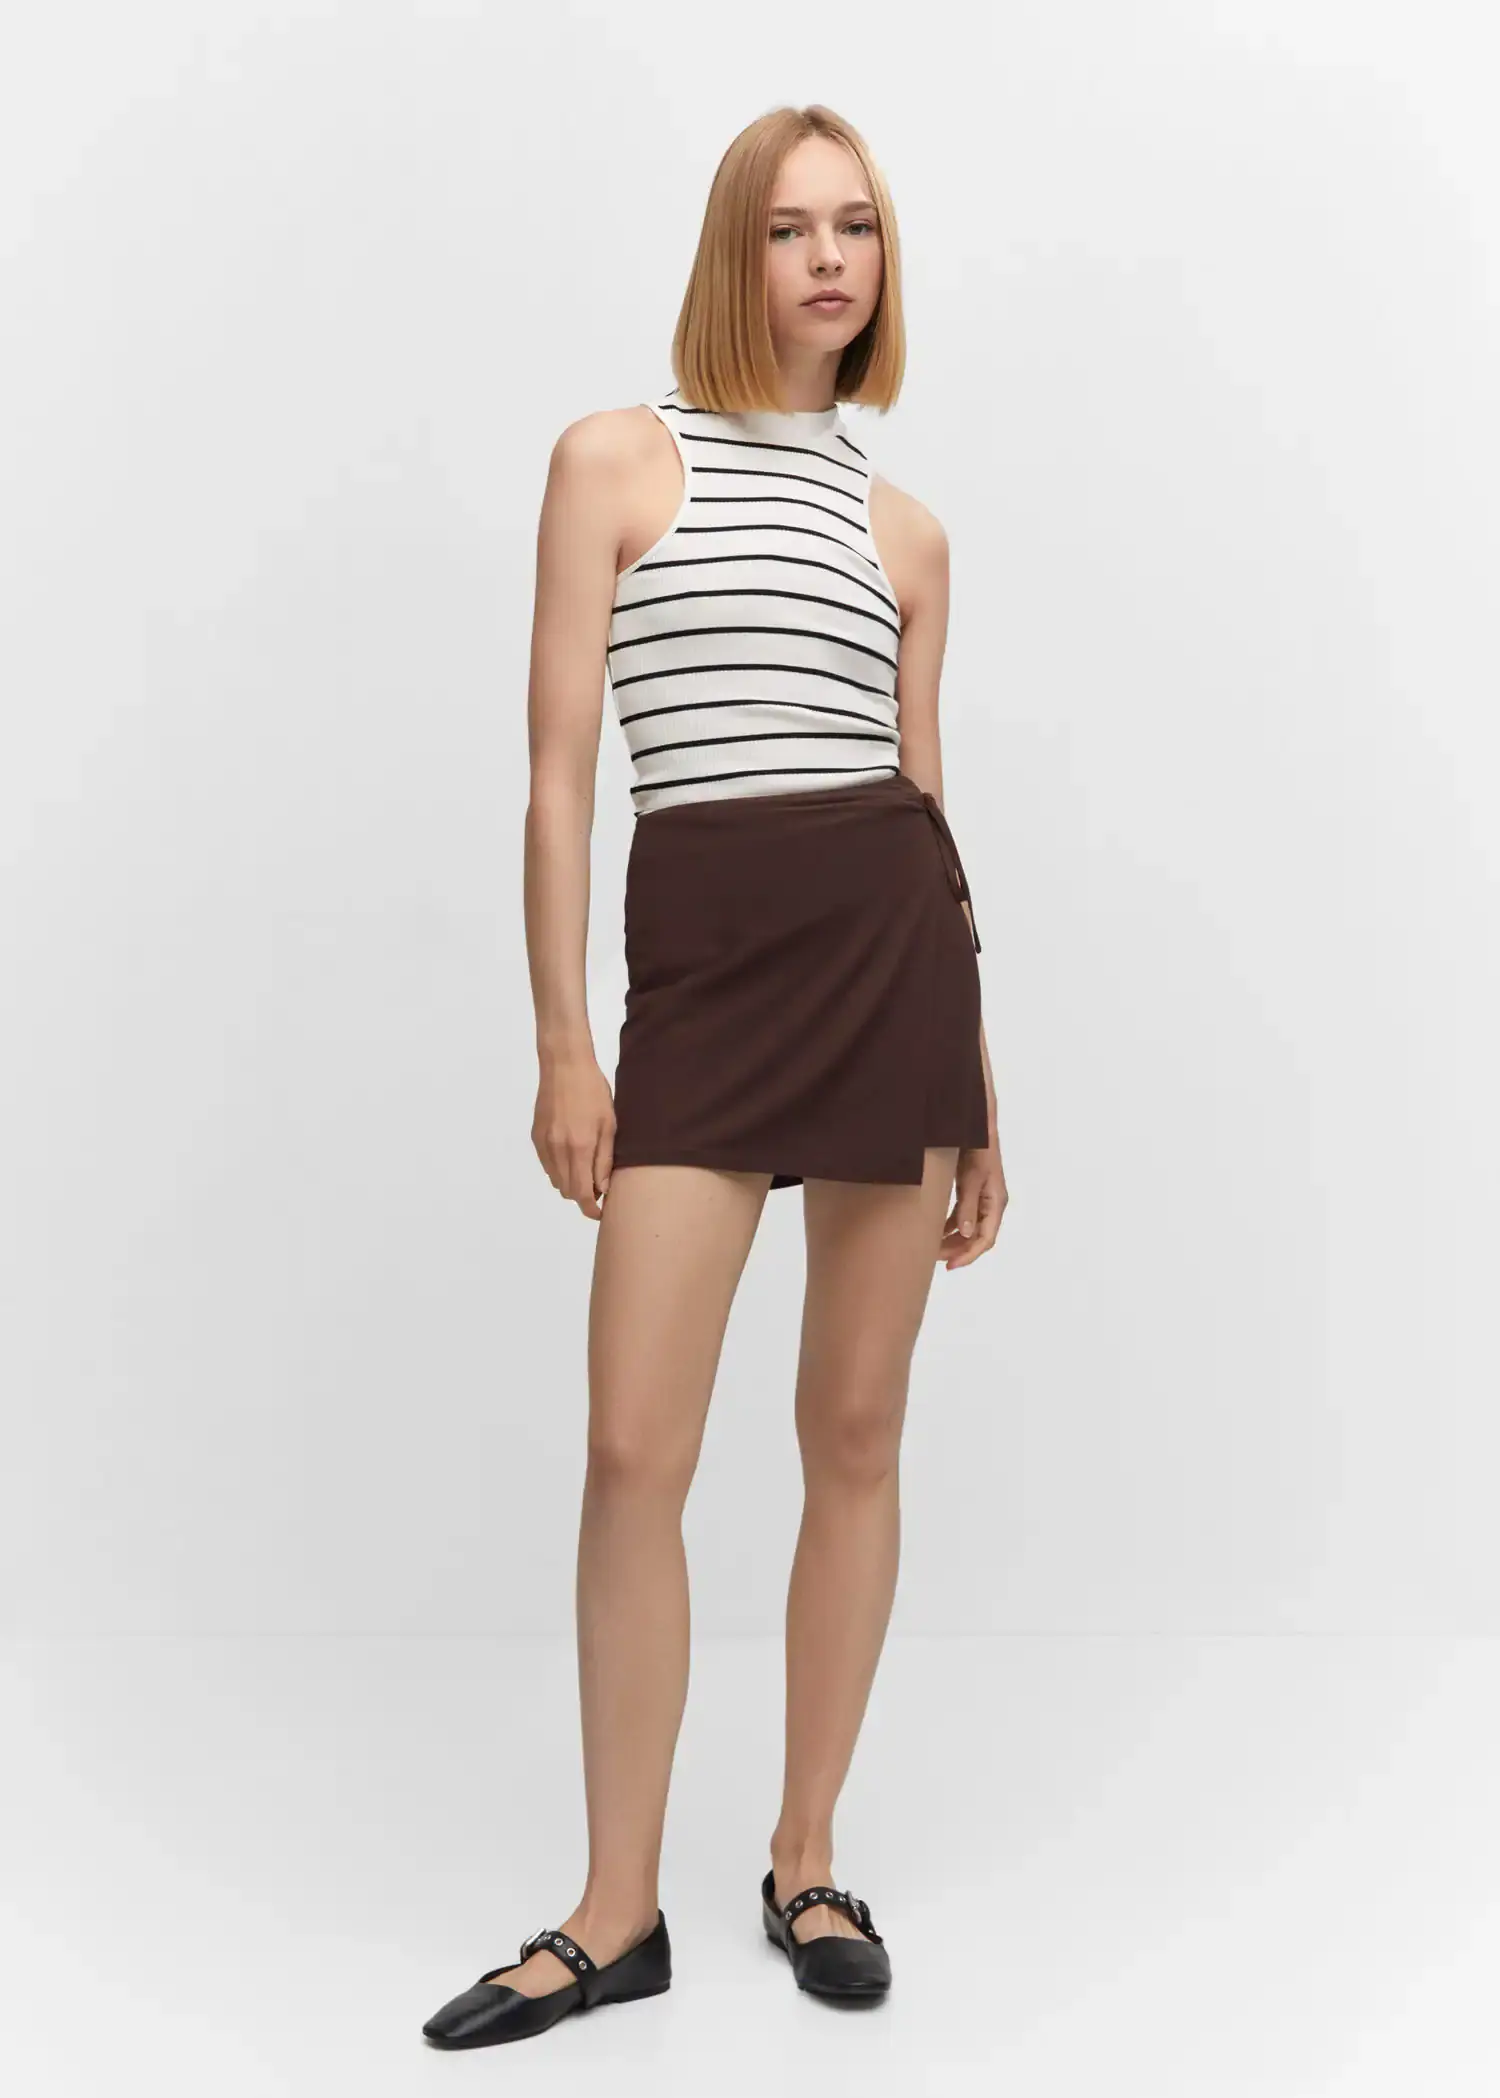 Mango Bow wrap skirt. a woman in a striped top and a brown skirt. 